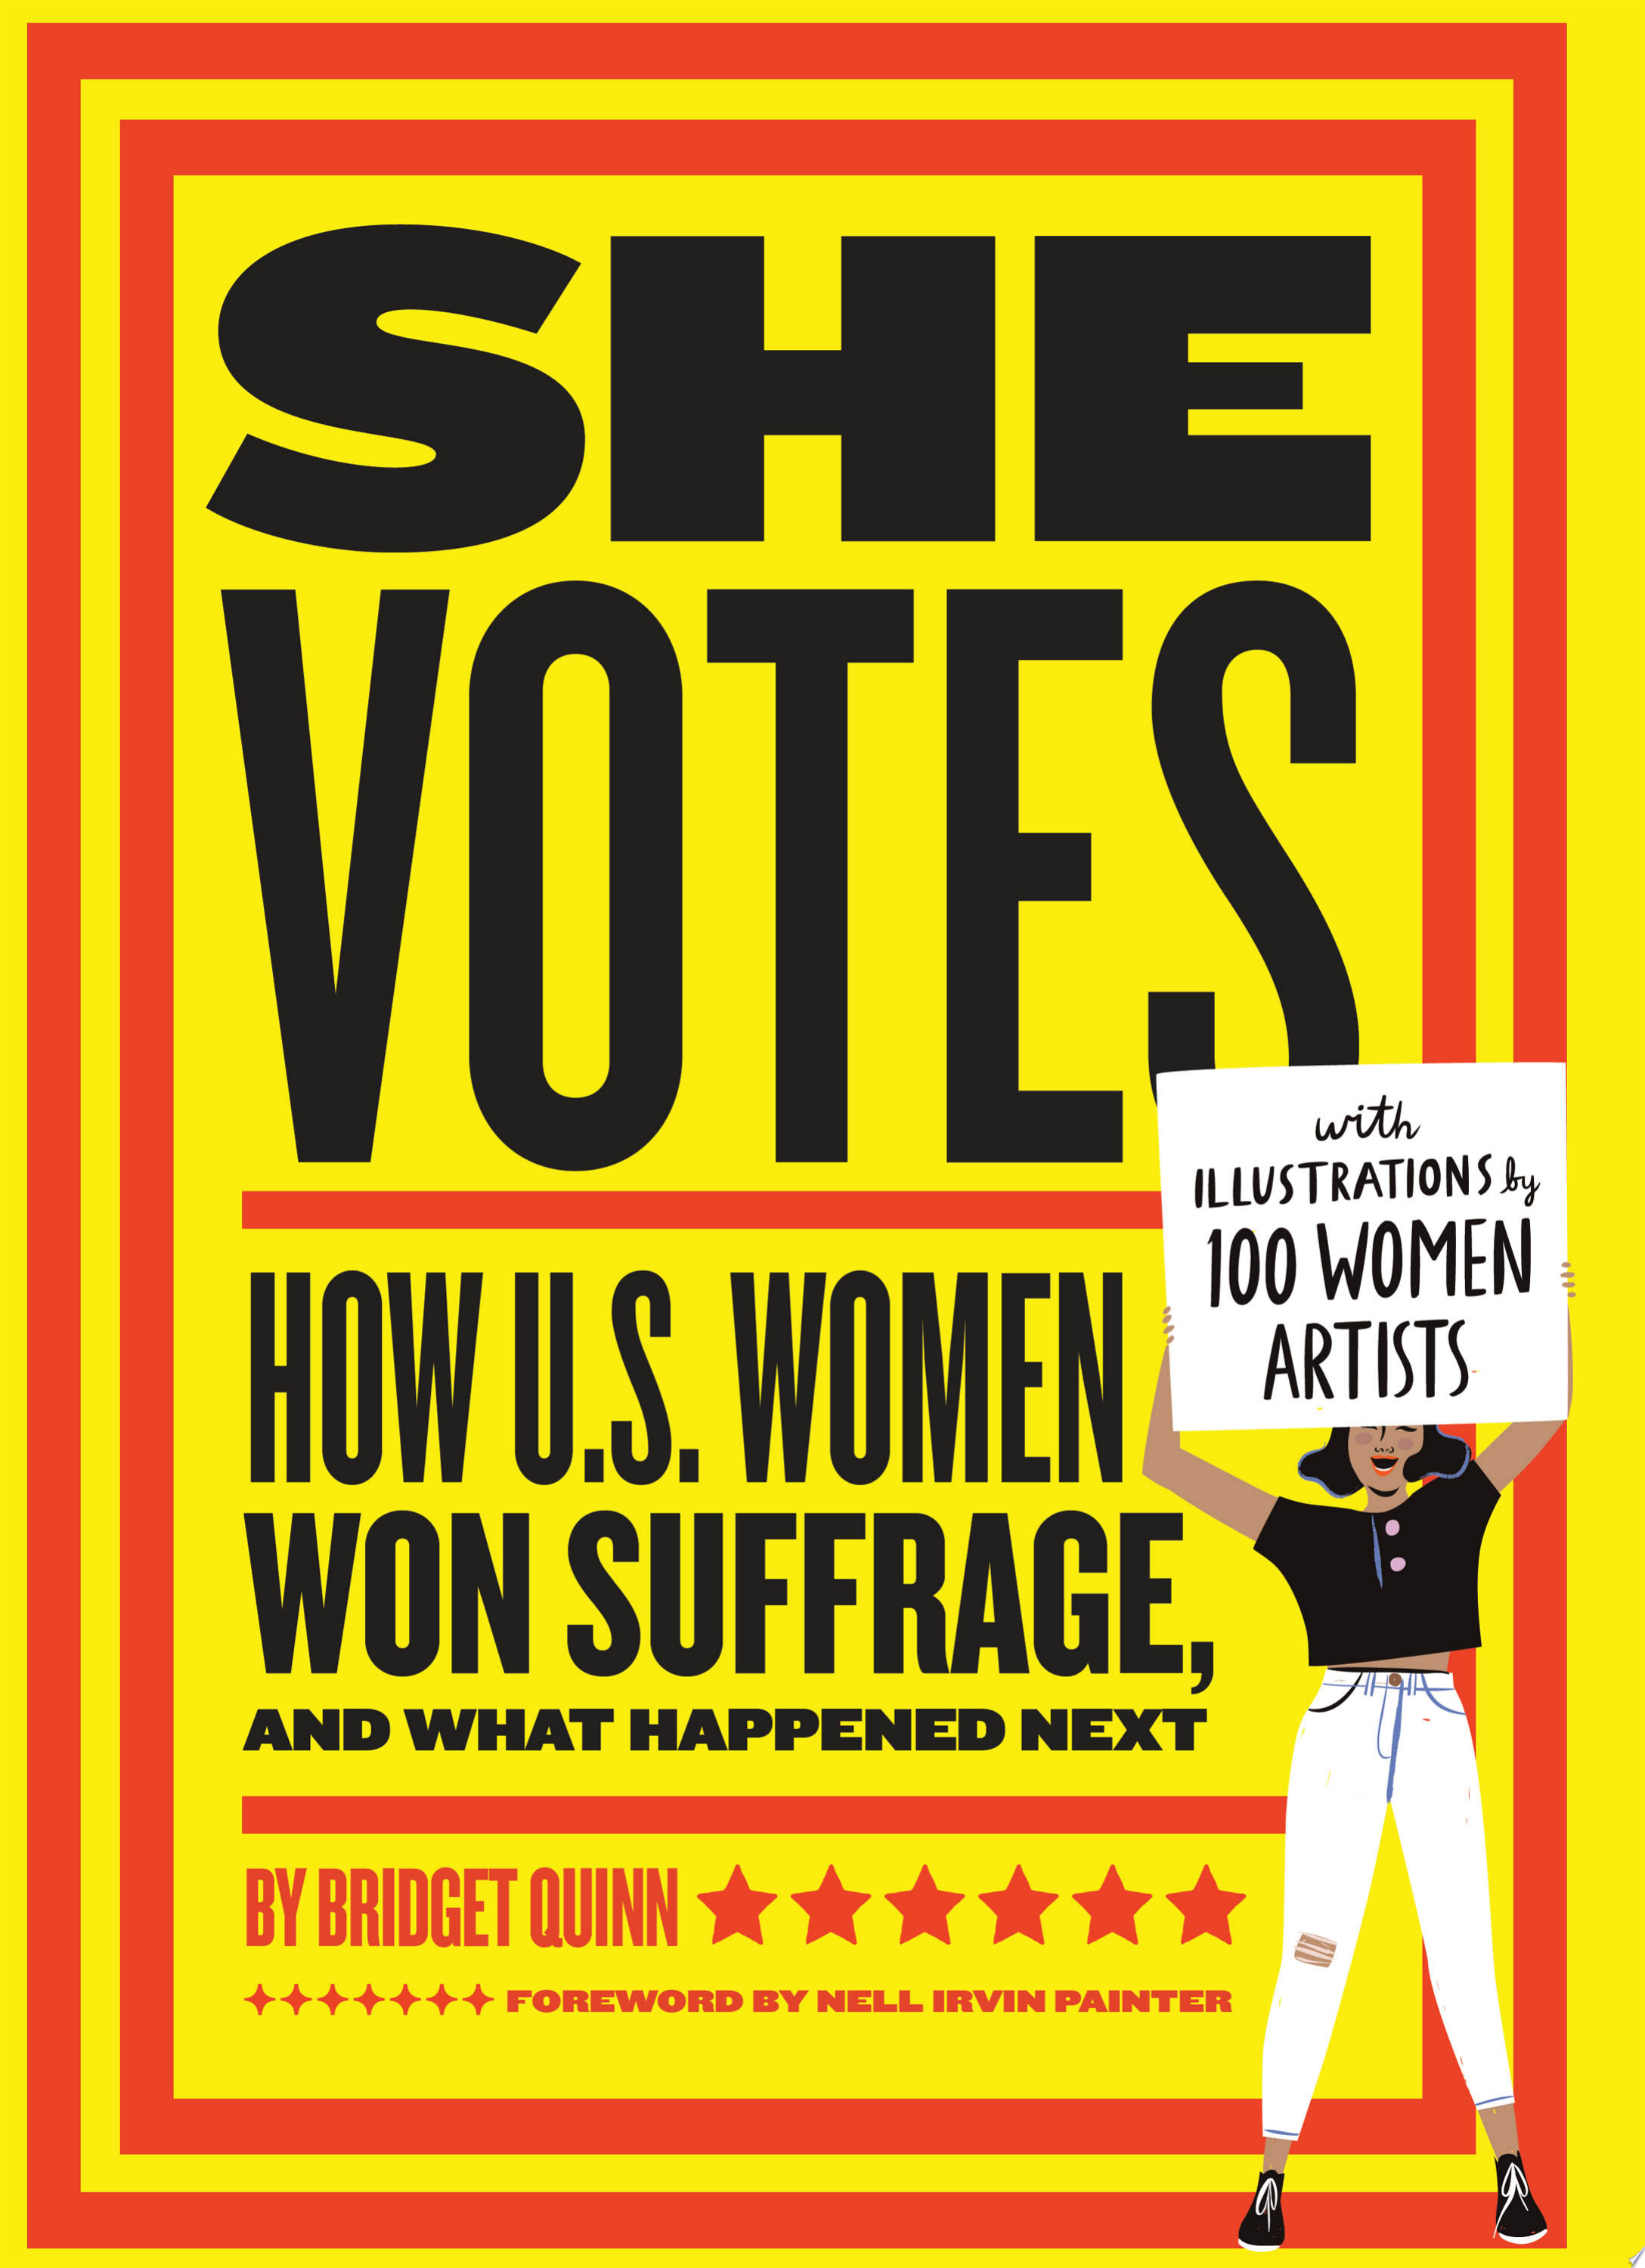 Image for "She Votes"